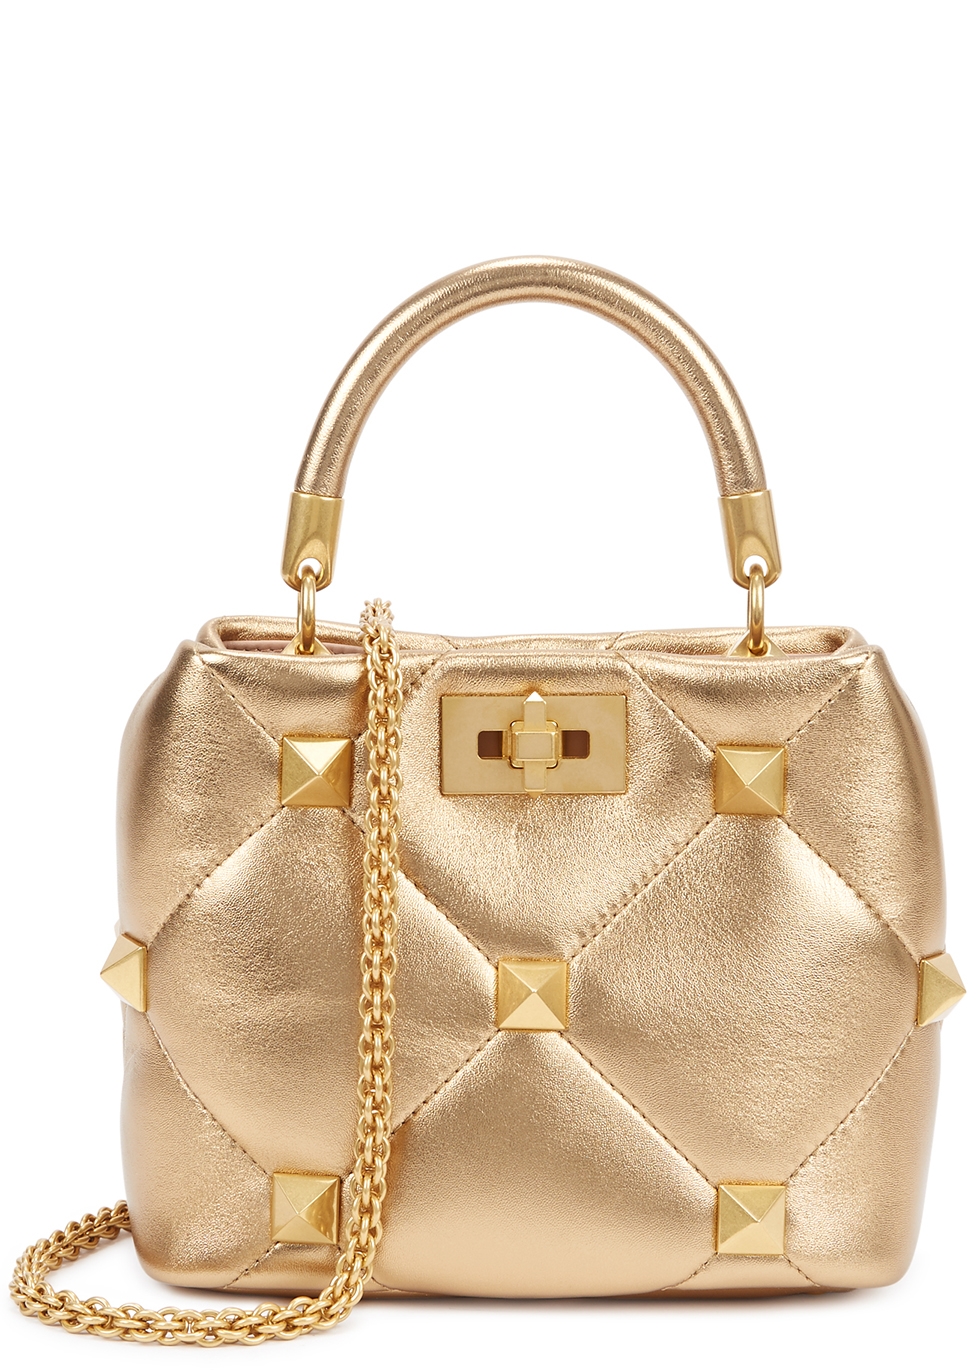 valentino SMALL ROMAN STUD THE SHOULDER BAG IN NAPPA WITH CHAIN PP Pink